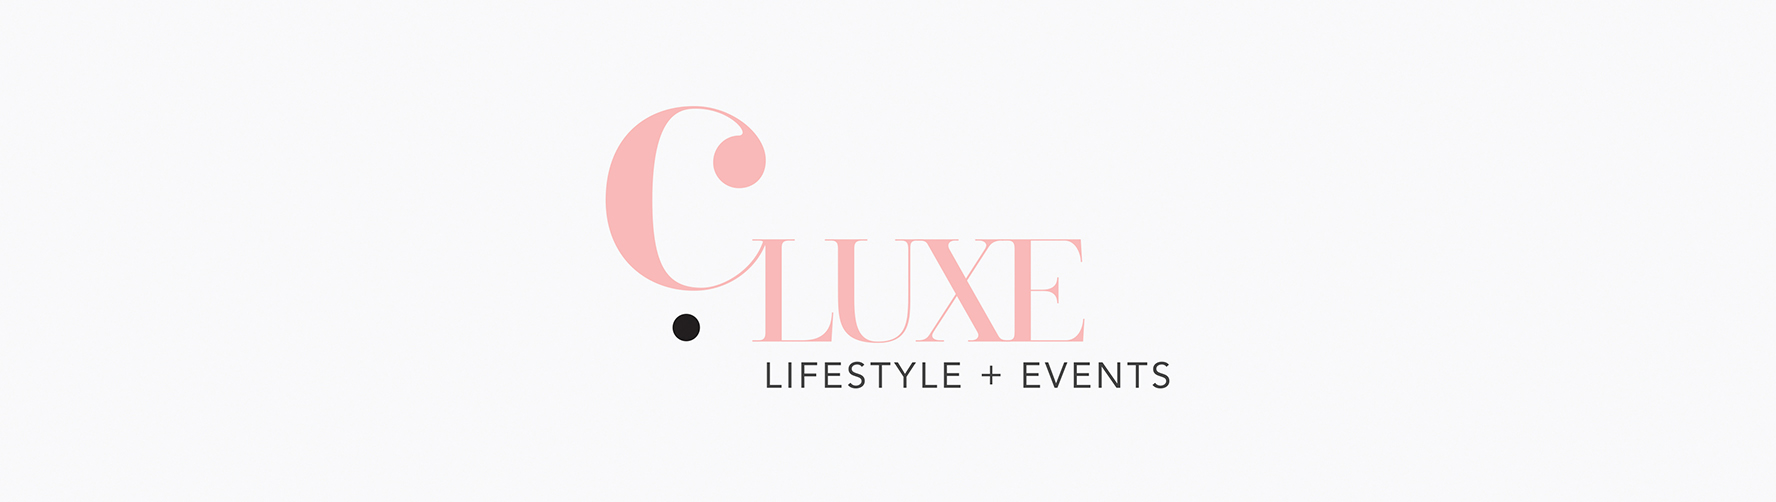 C Luxe Lifestyle and Events